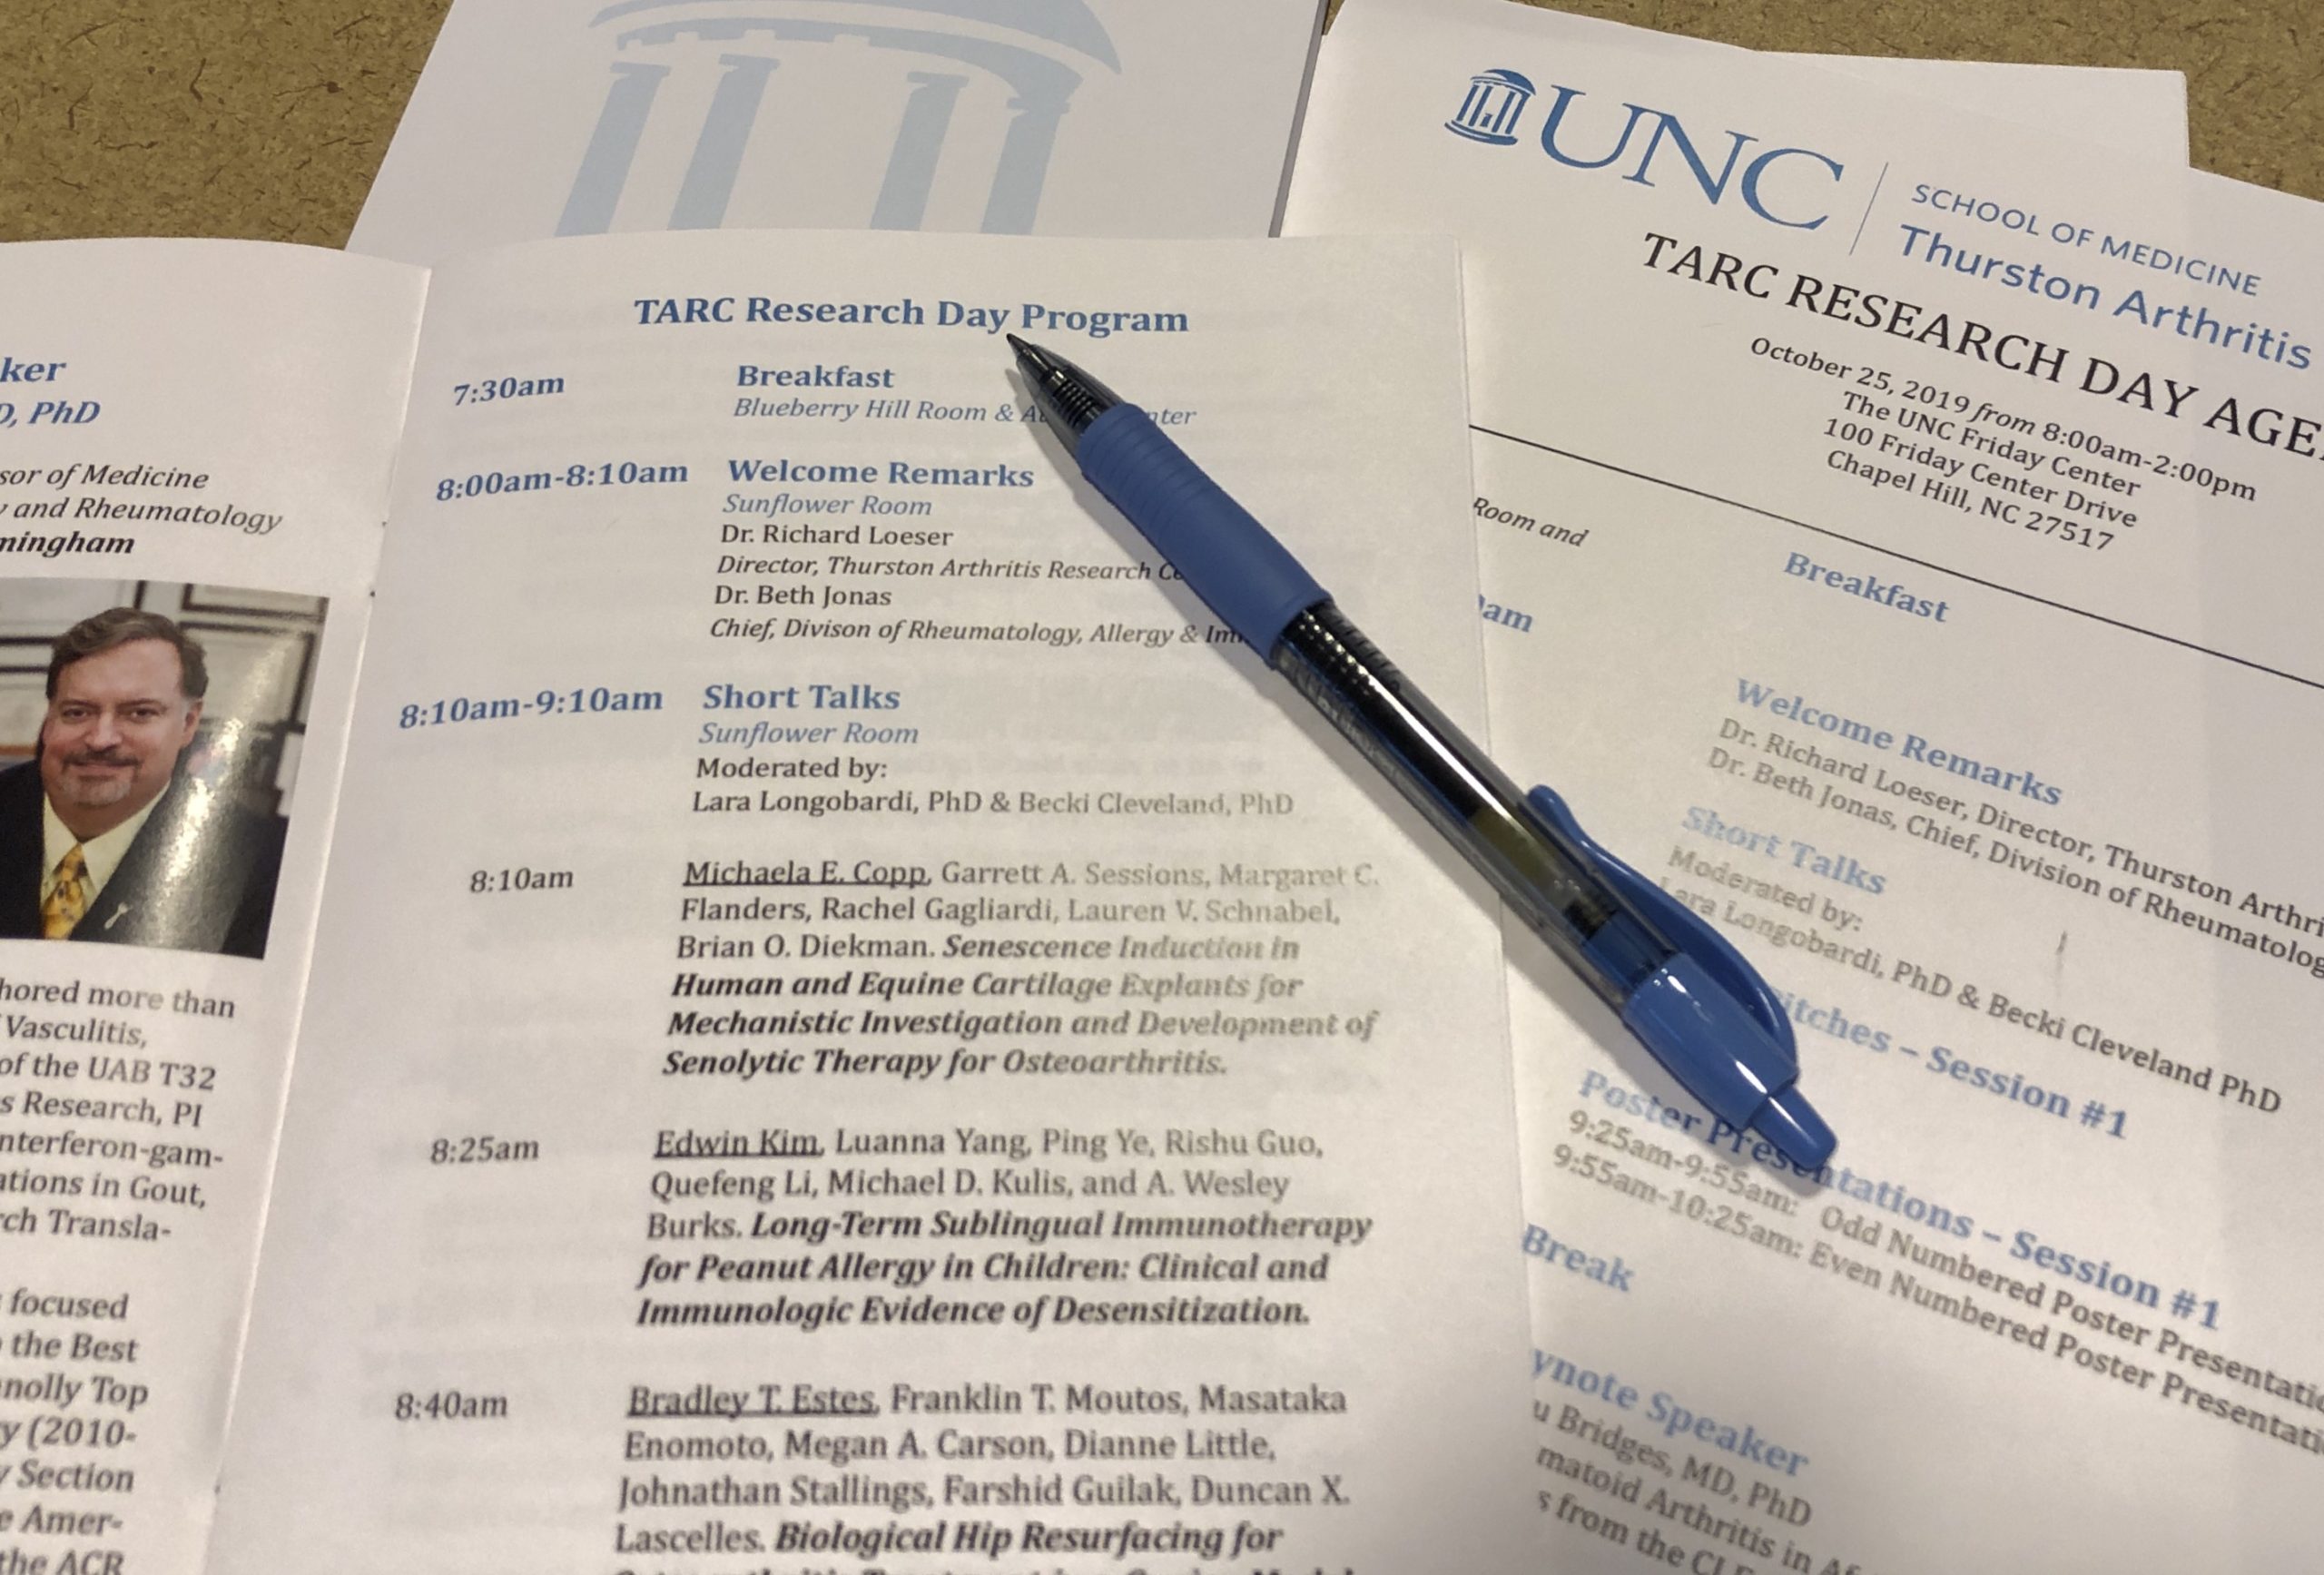 TARC Research Day; Highlights from Previous Years | Thurston Arthritis